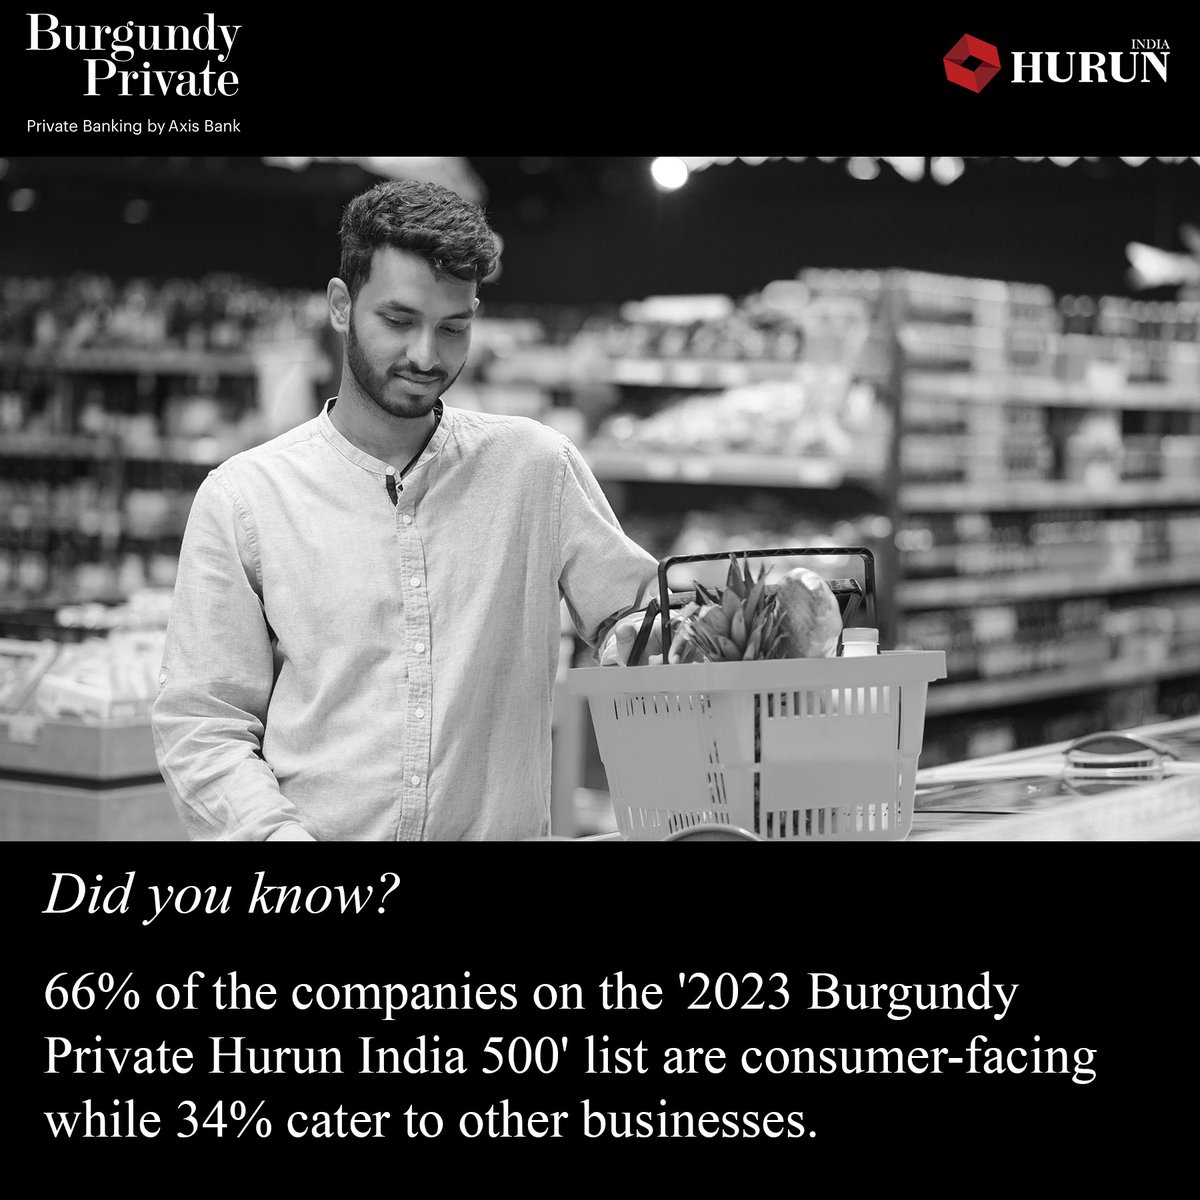 Discover which companies are shaping consumer trends and powering businesses behind the scenes in the '2023 Burgundy Private Hurun India 500' report. #BurgundyPrivate #HurunIndia500 #BusinessInsights